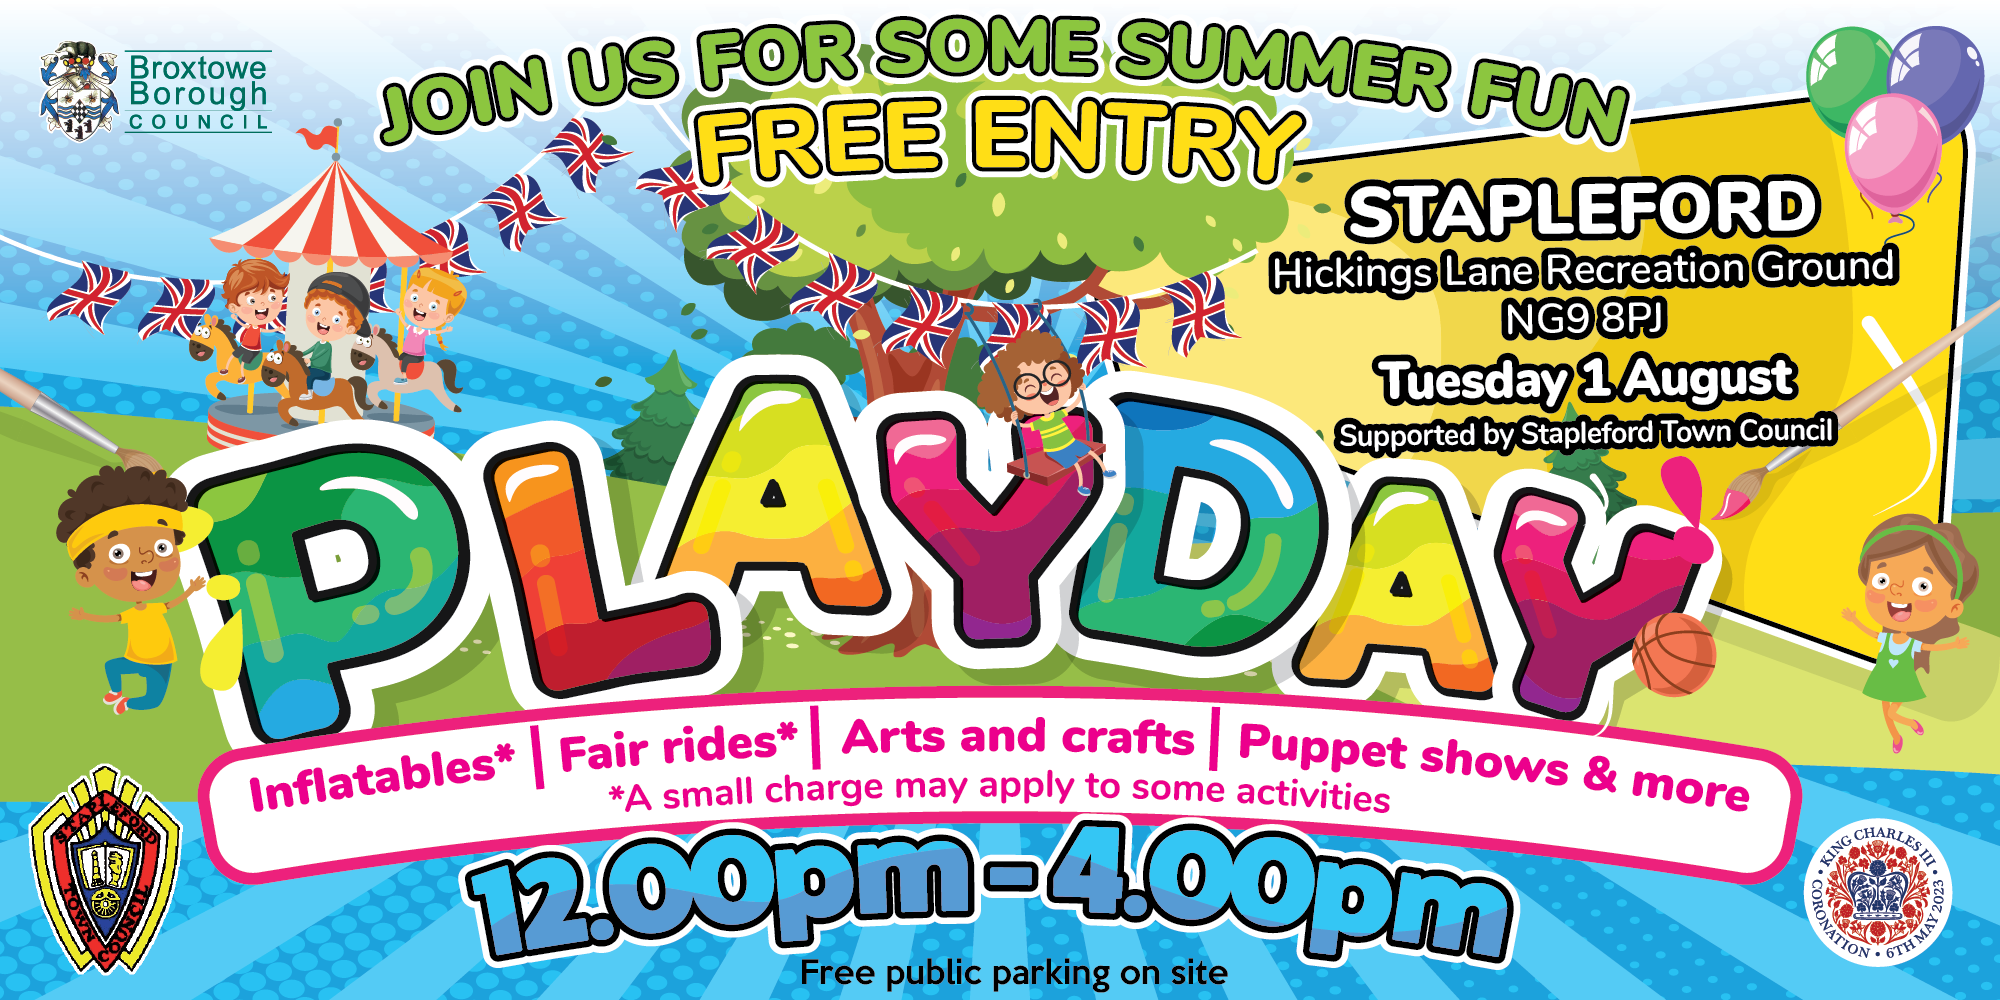 Stapleford Play Day event.